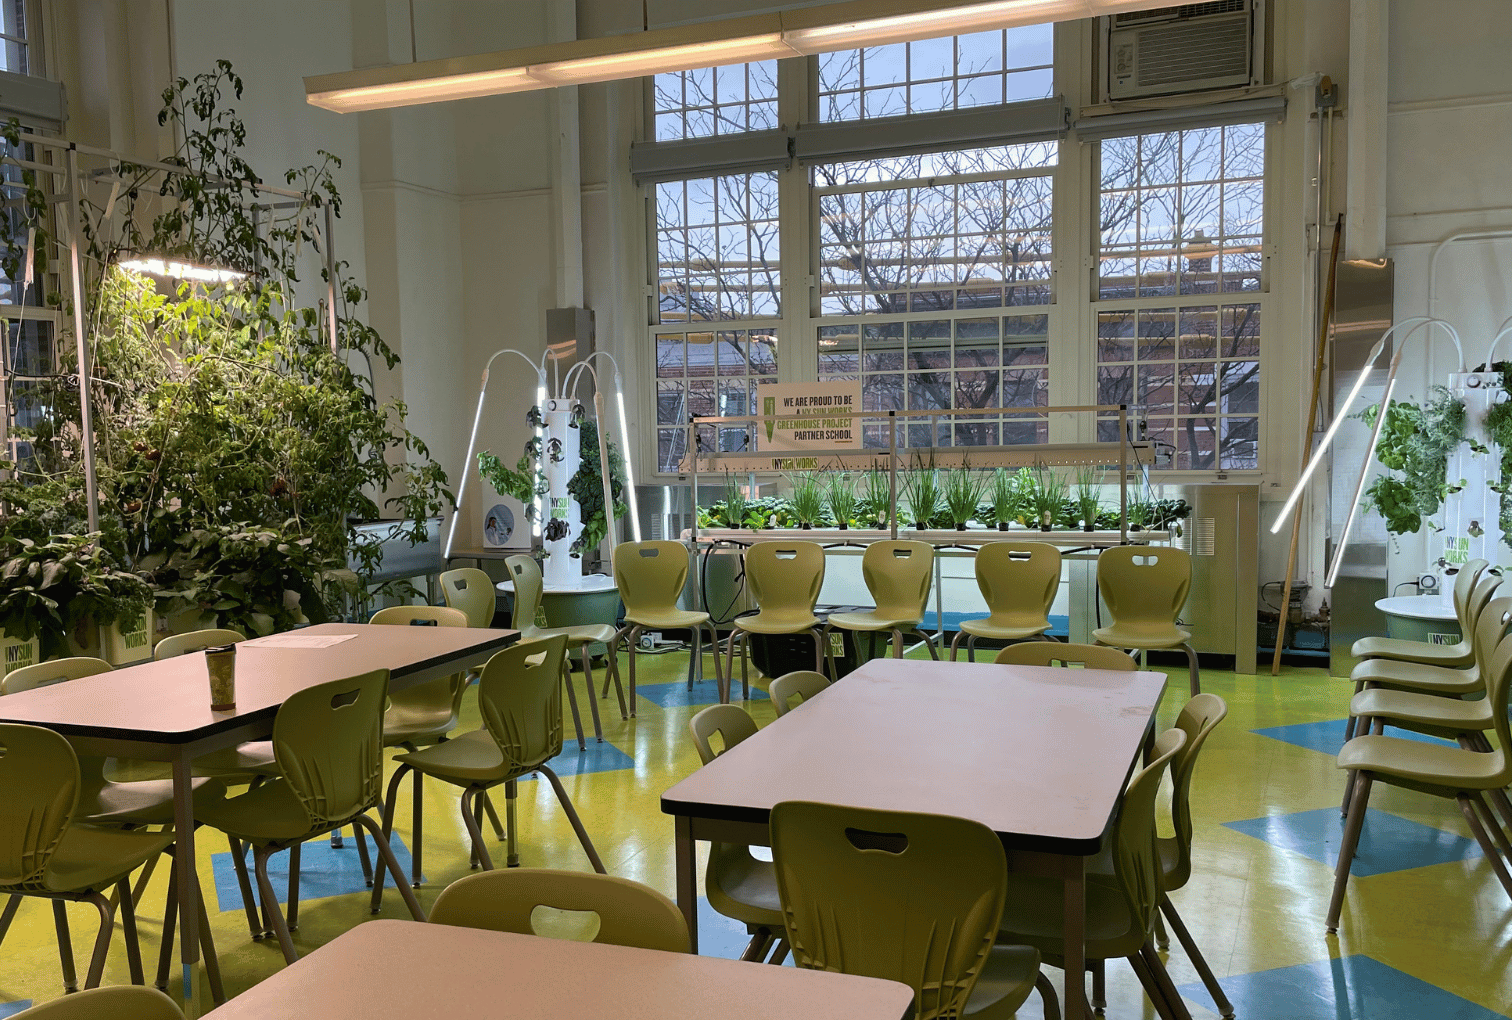 an indoor hydroponic classroom complete with vine crop, tower, and nutrient film technique systems